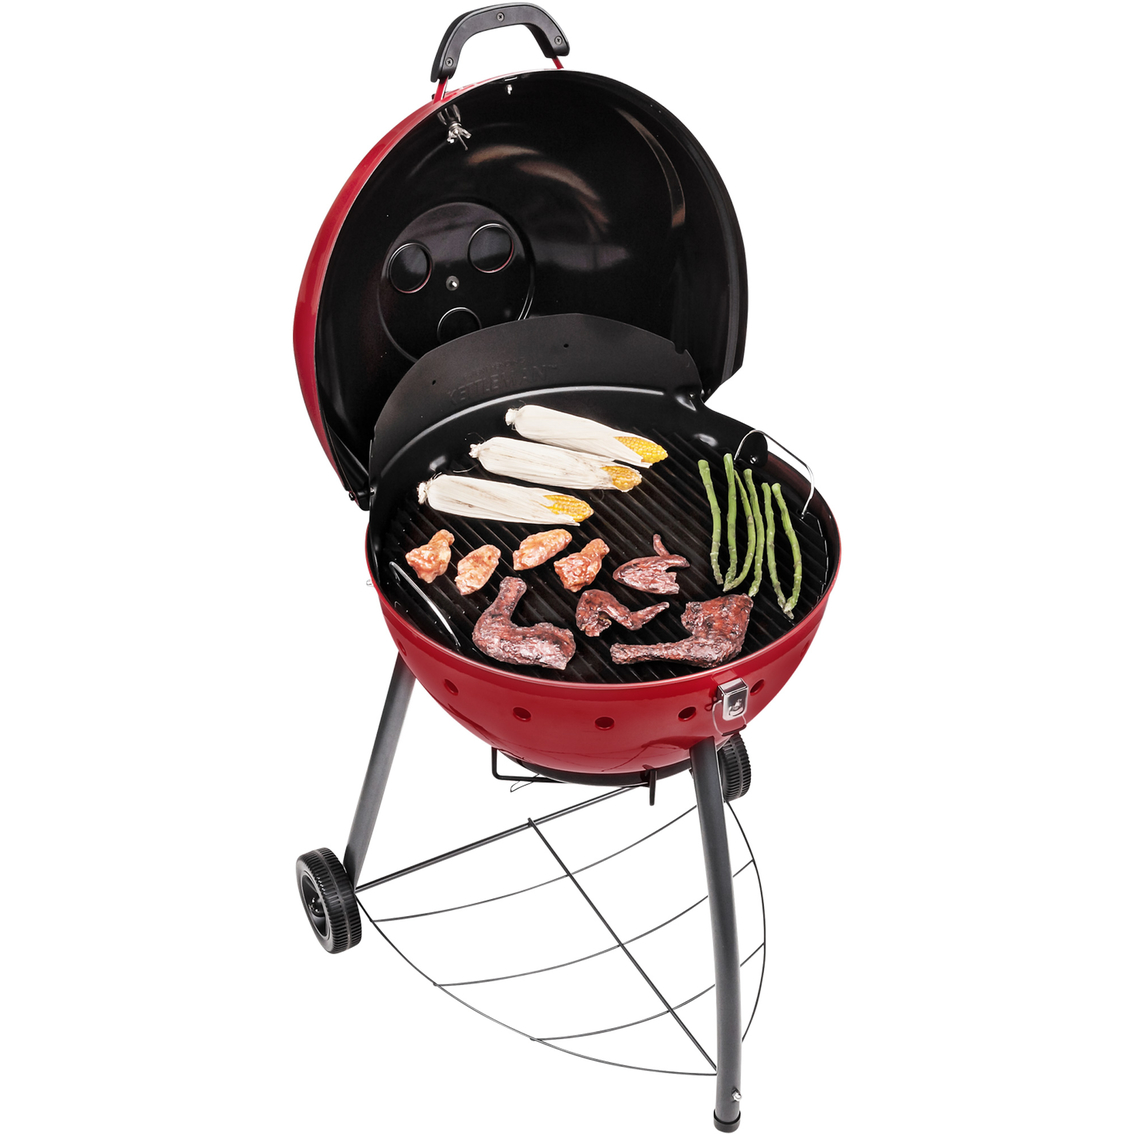 Char-Broil Red Kettleman Charcoal Grill - Image 4 of 5